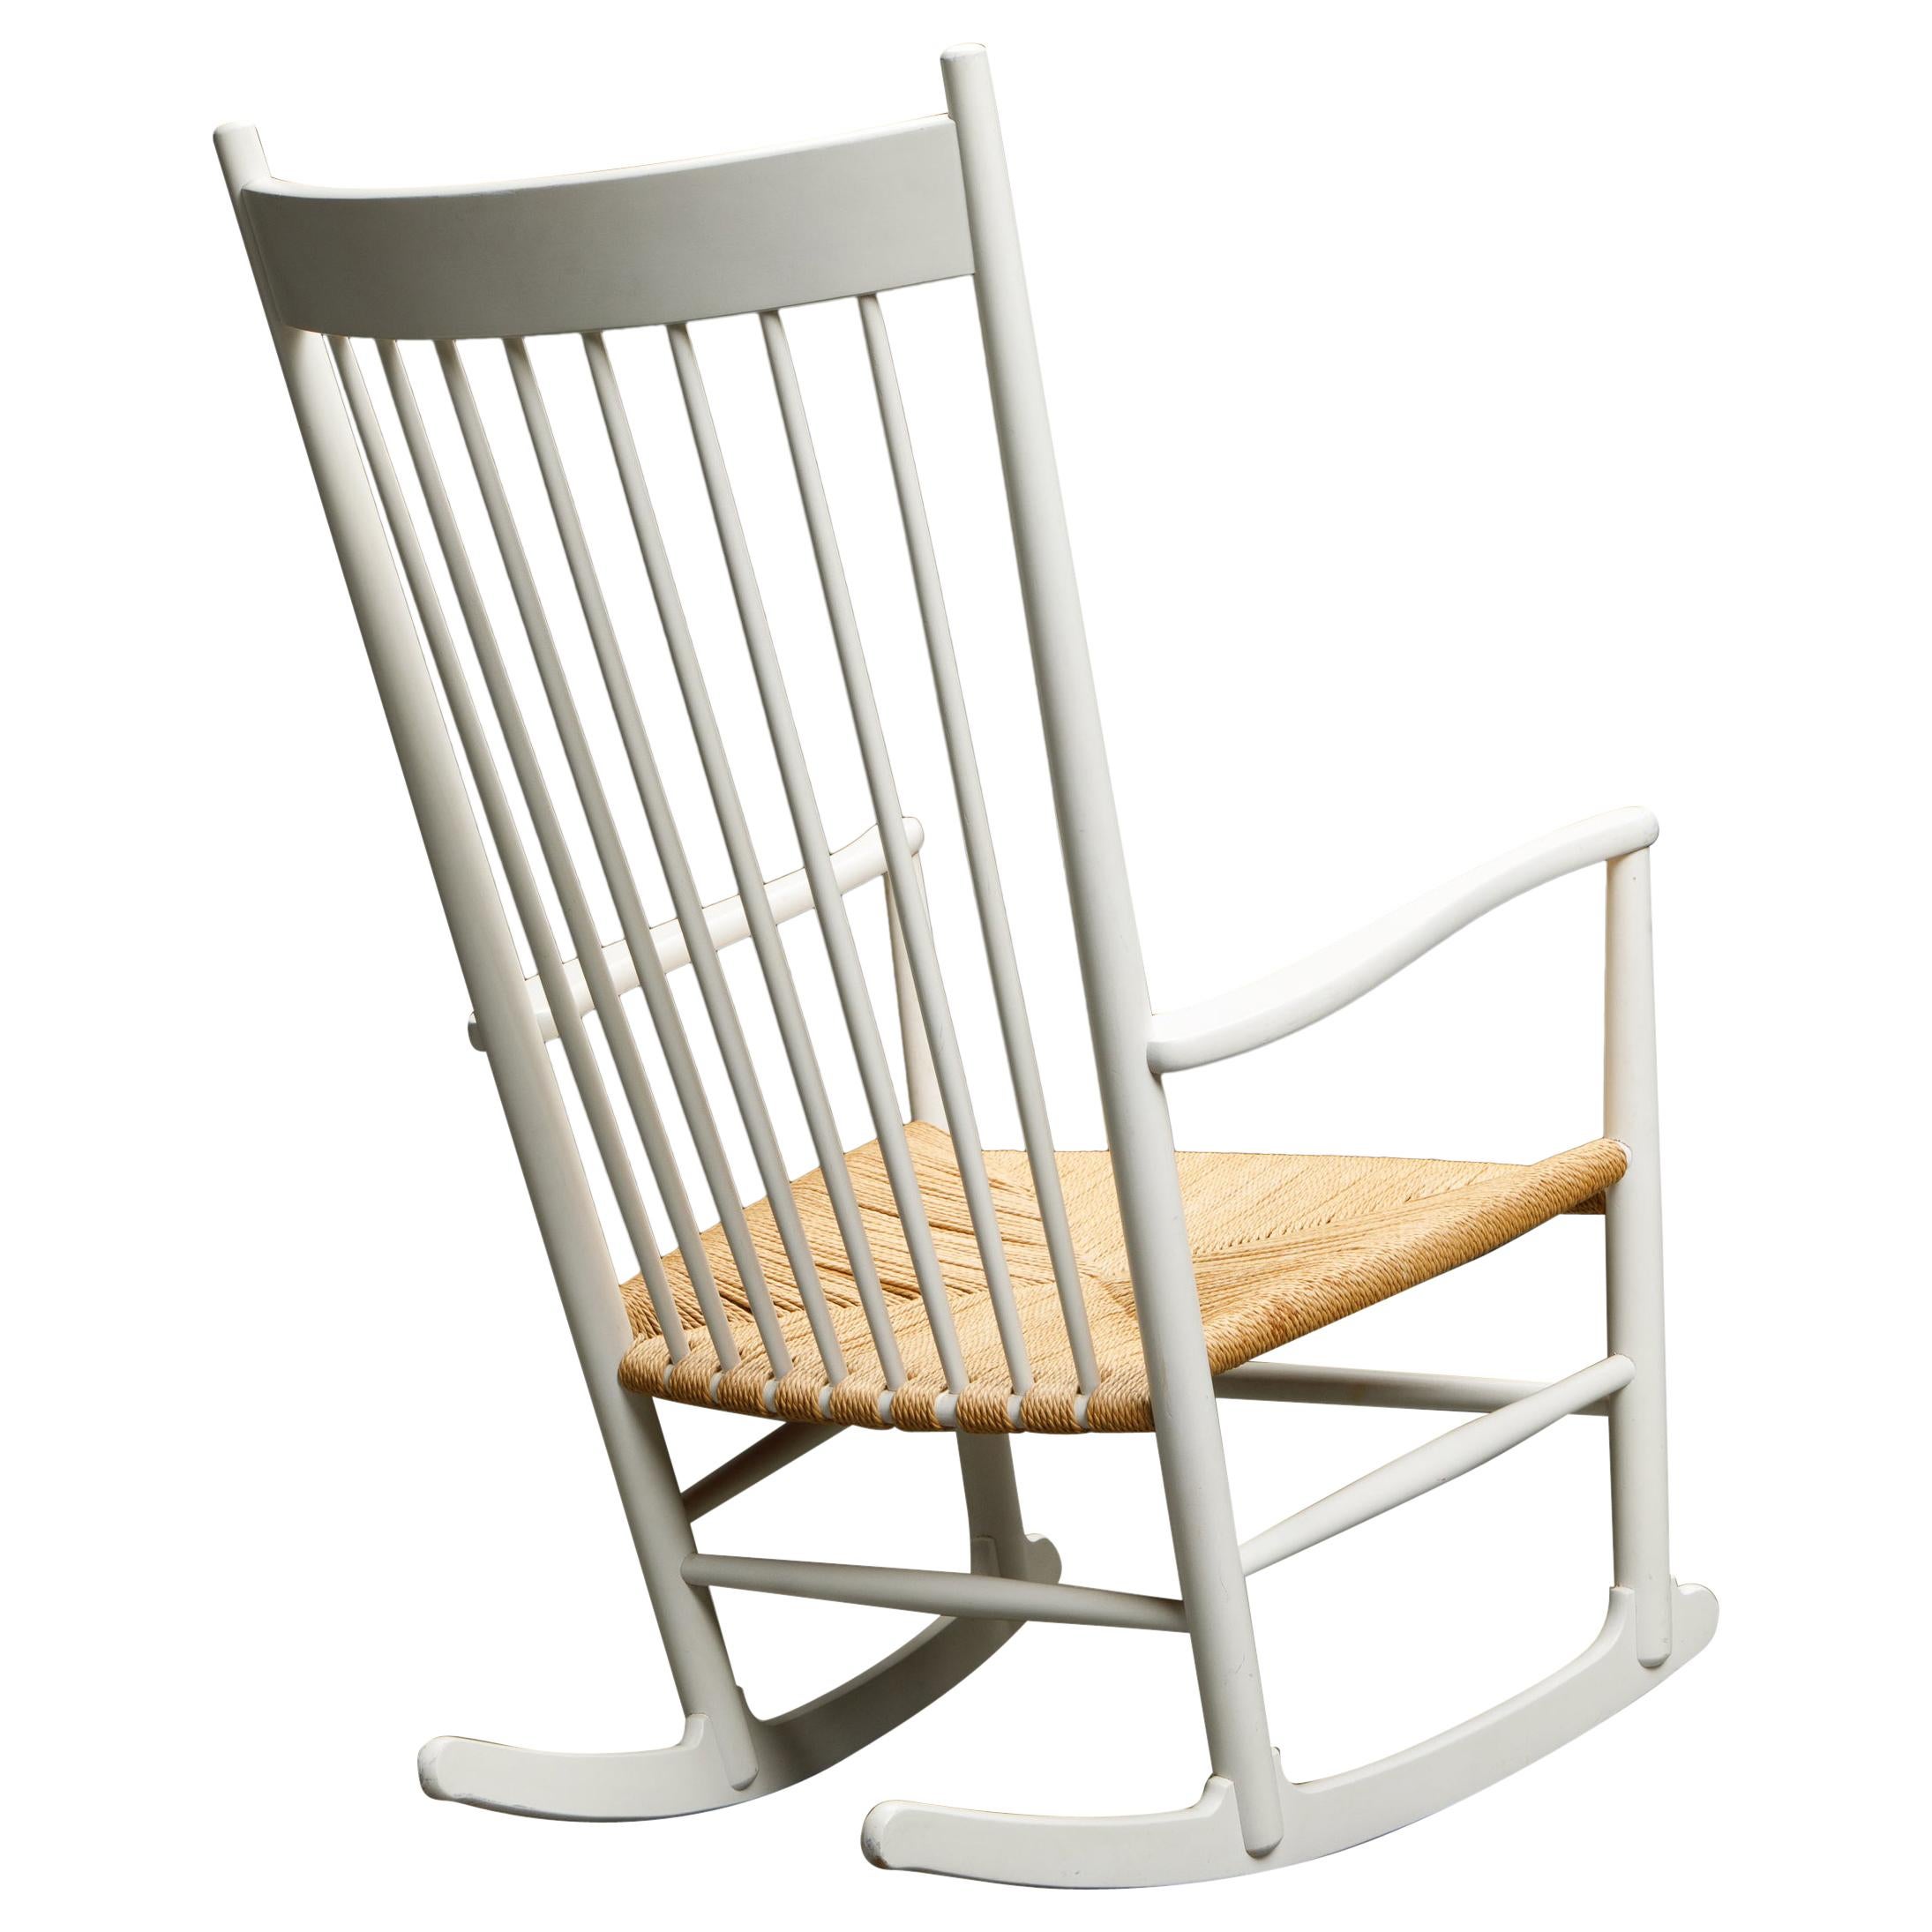 Hans Wegner 'J-16' Rocking Chair for Fredericia, Signed & Dated